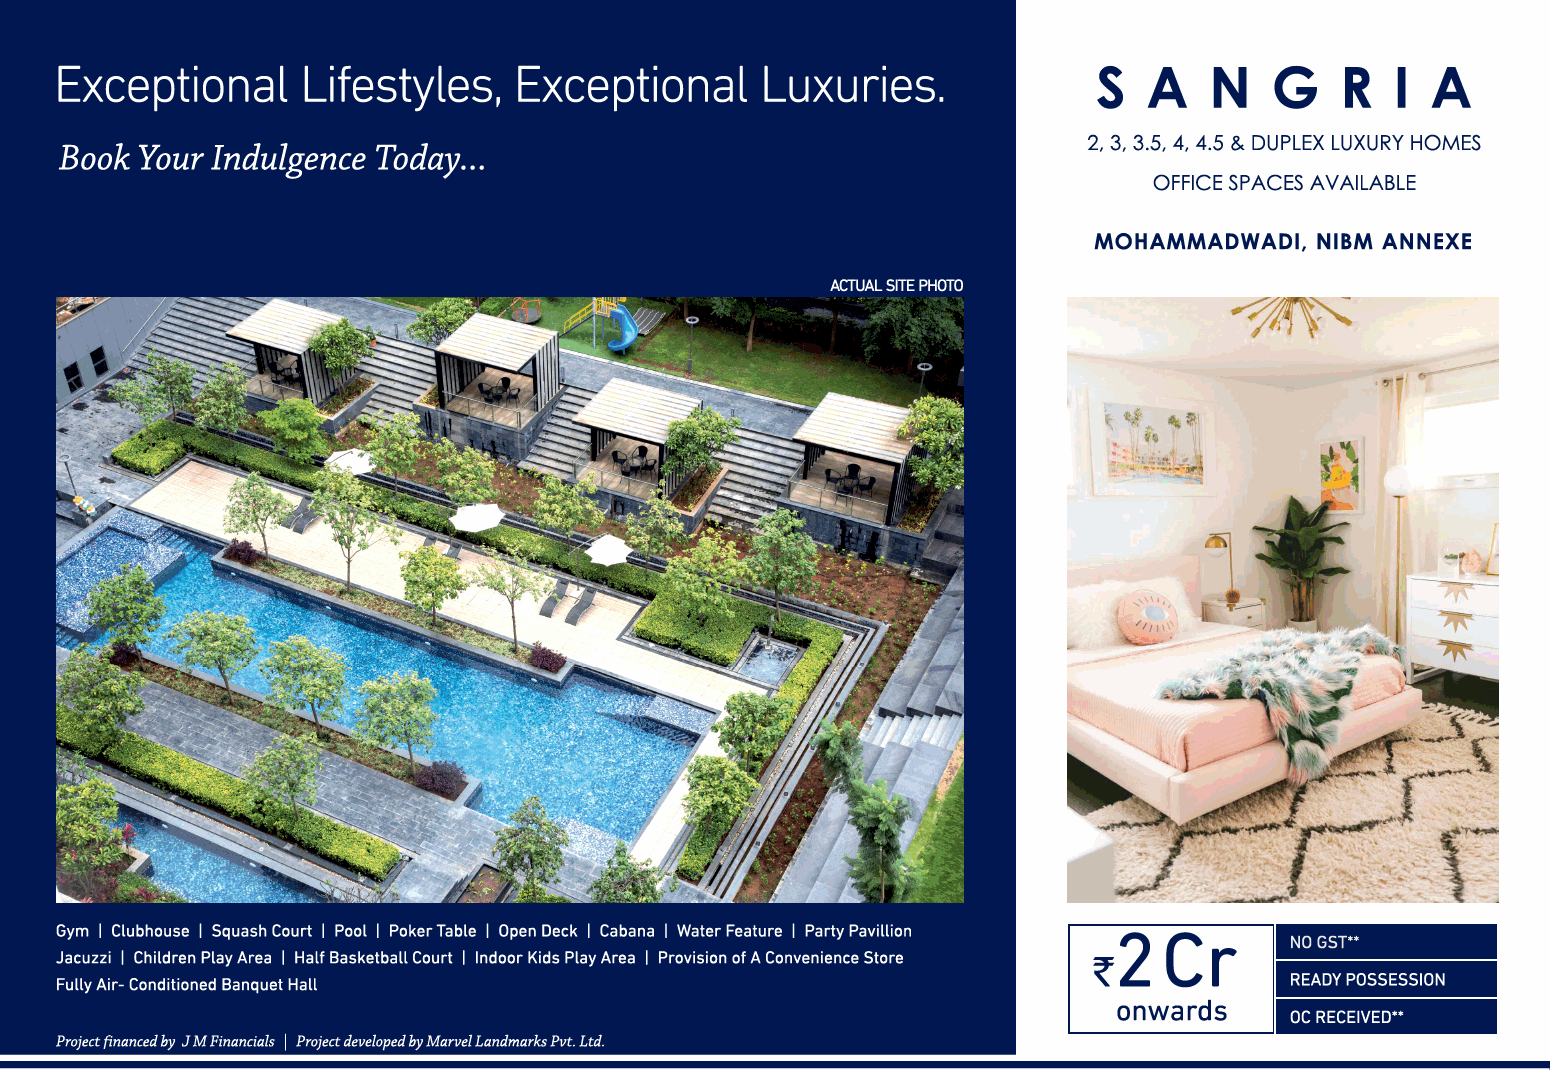 Apartments are ready for possession at Marvel Ganga Sangria in Pune